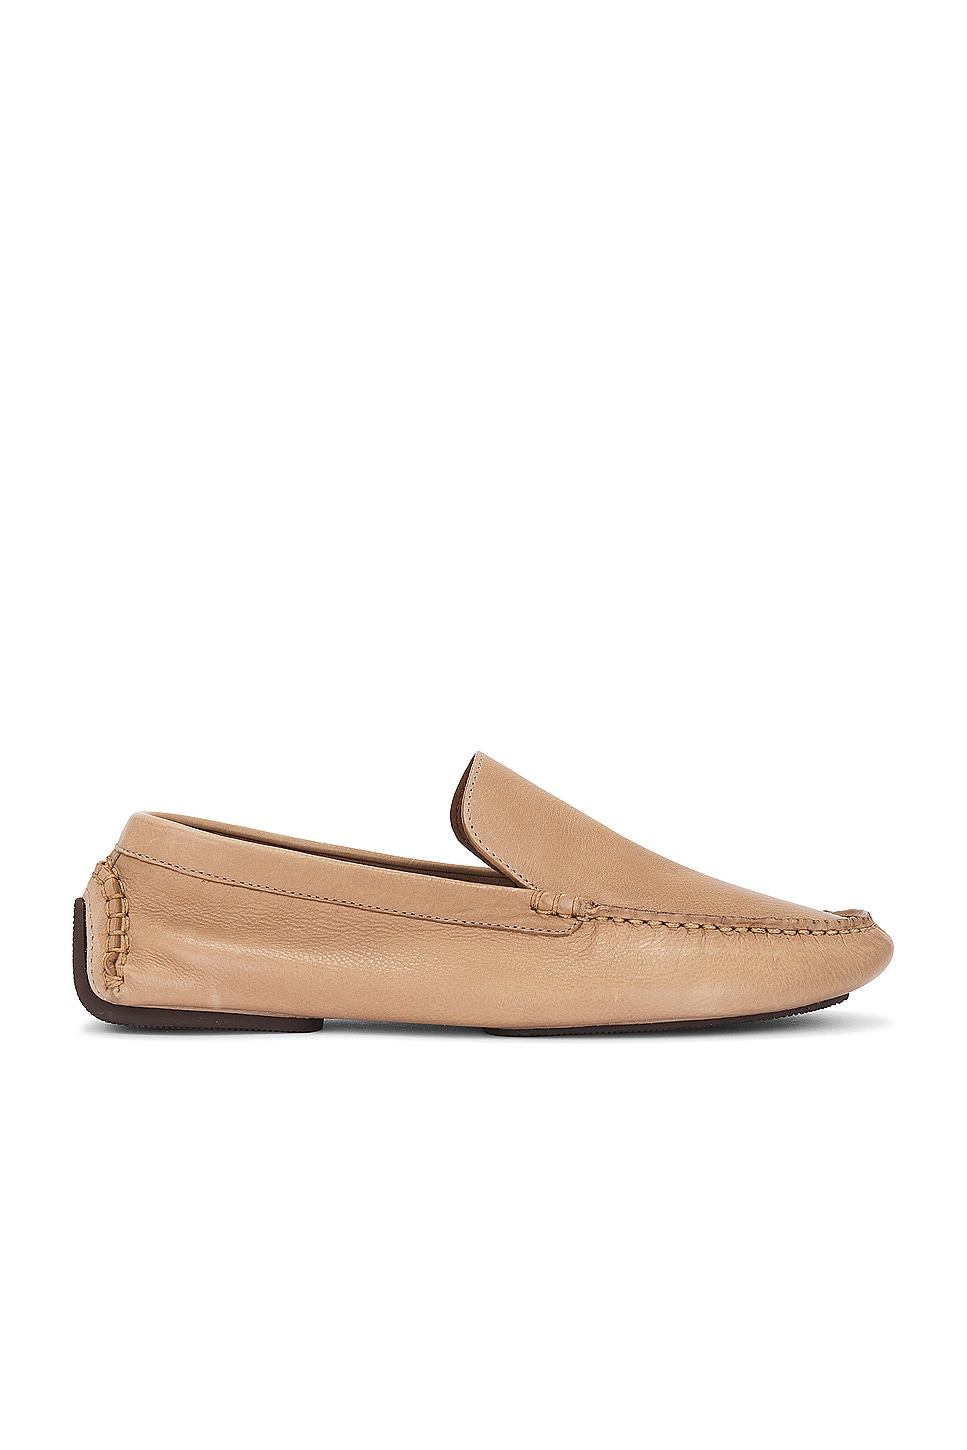 Image 1 of The Row Lucca Slip On in TAUPE